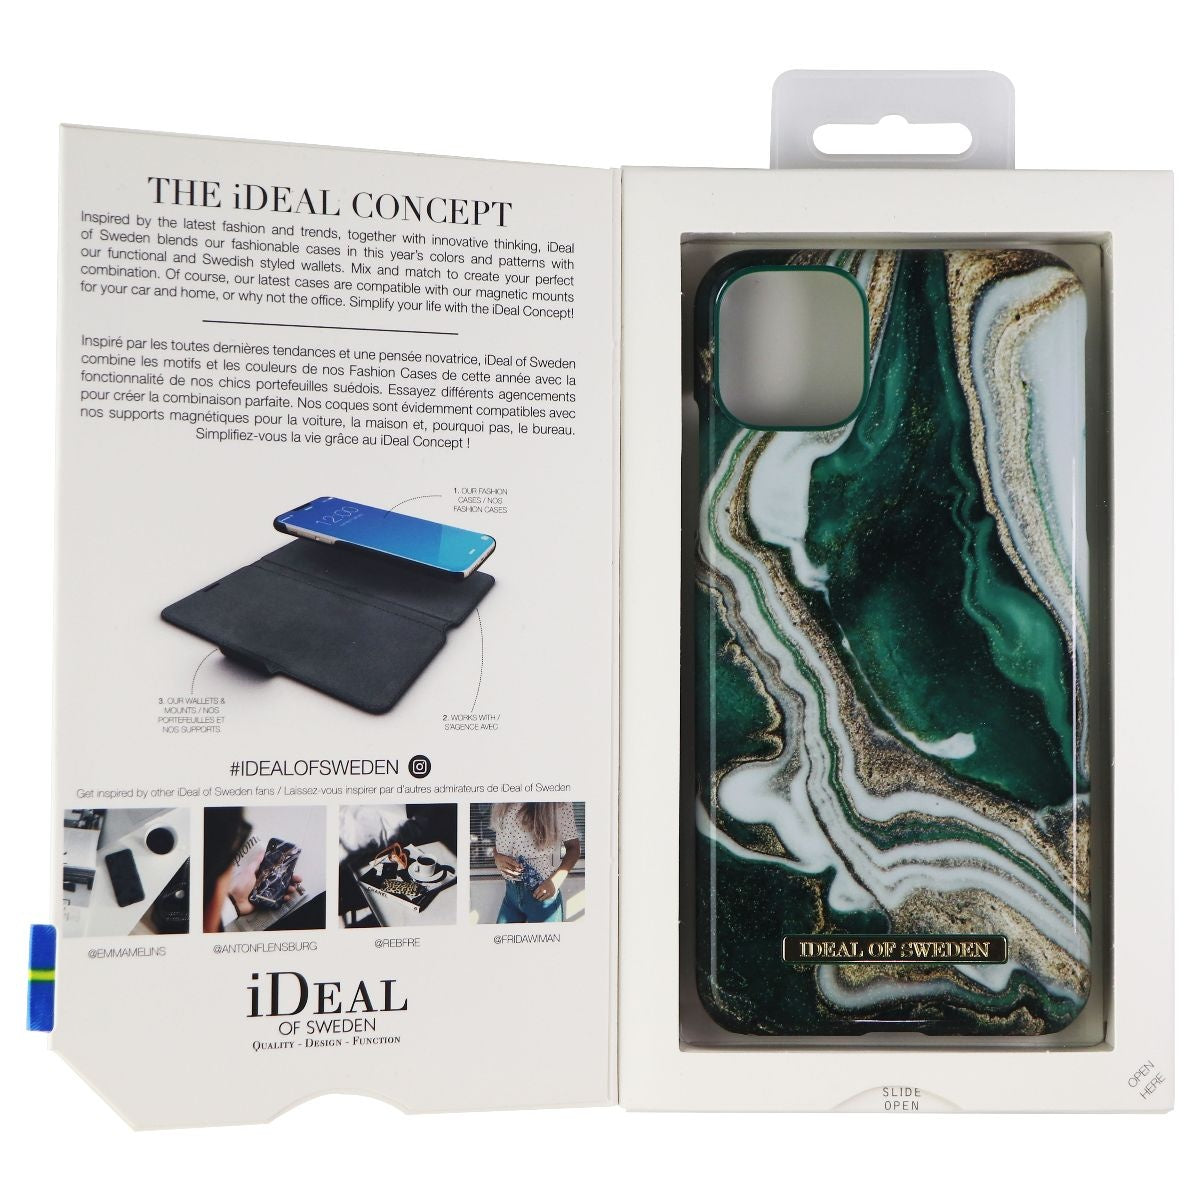 iDeal of Sweden Hard Case for iPhone 11 Pro Max / Xs Max - Golden Jade Marble Cell Phone - Cases, Covers & Skins iDeal of Sweden    - Simple Cell Bulk Wholesale Pricing - USA Seller